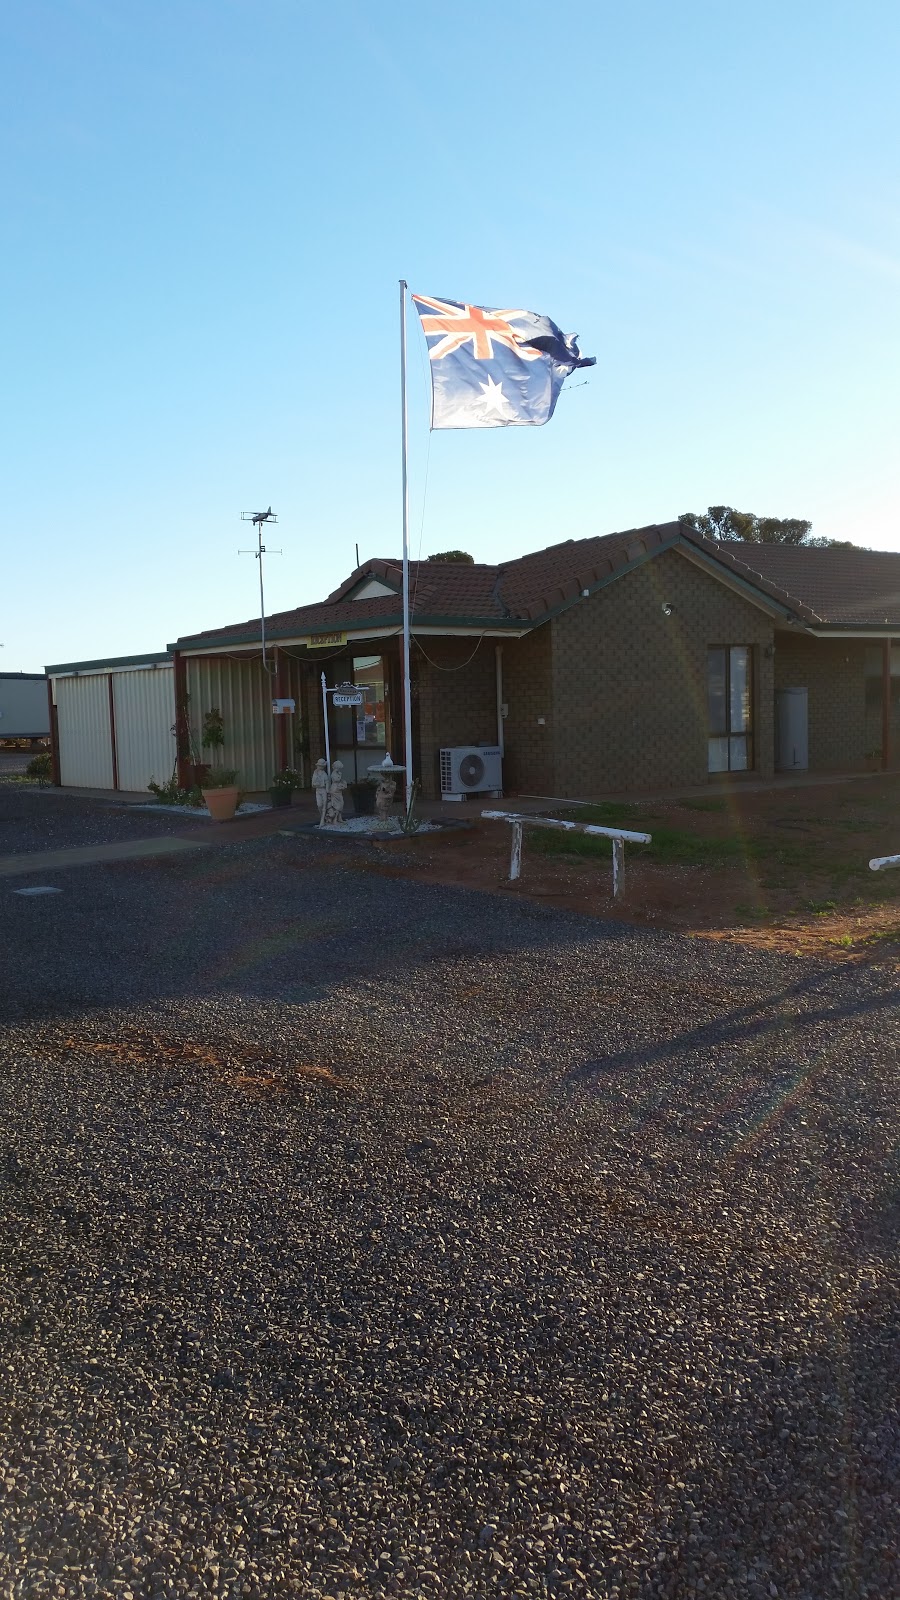 Airport Whyalla Motel | lodging | 145 Lincoln Hwy, Whyalla SA 5608, Australia | 0886452122 OR +61 8 8645 2122